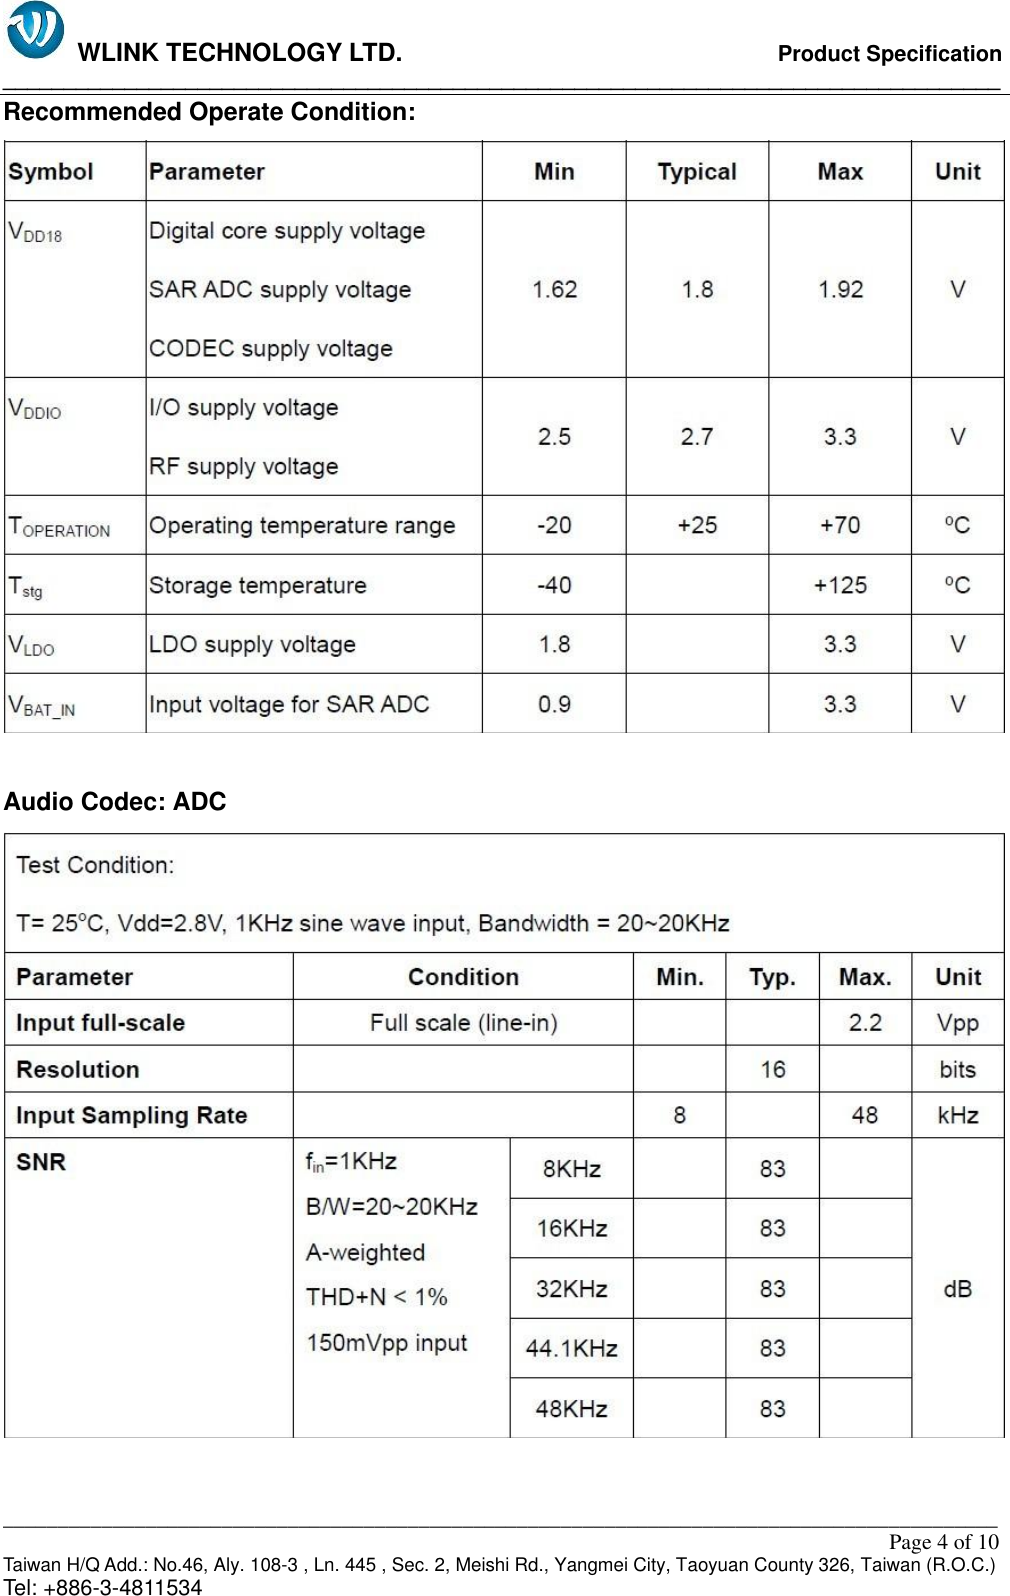   WLINK TECHNOLOGY LTD.                              Product Specification __________________________________________________________________________________ ___________________________________________________________________________________________                                                                                                                                                         Page 4 of 10 Taiwan H/Q Add.: No.46, Aly. 108-3 , Ln. 445 , Sec. 2, Meishi Rd., Yangmei City, Taoyuan County 326, Taiwan (R.O.C.)   Tel: +886-3-4811534 Recommended Operate Condition:   Audio Codec: ADC   